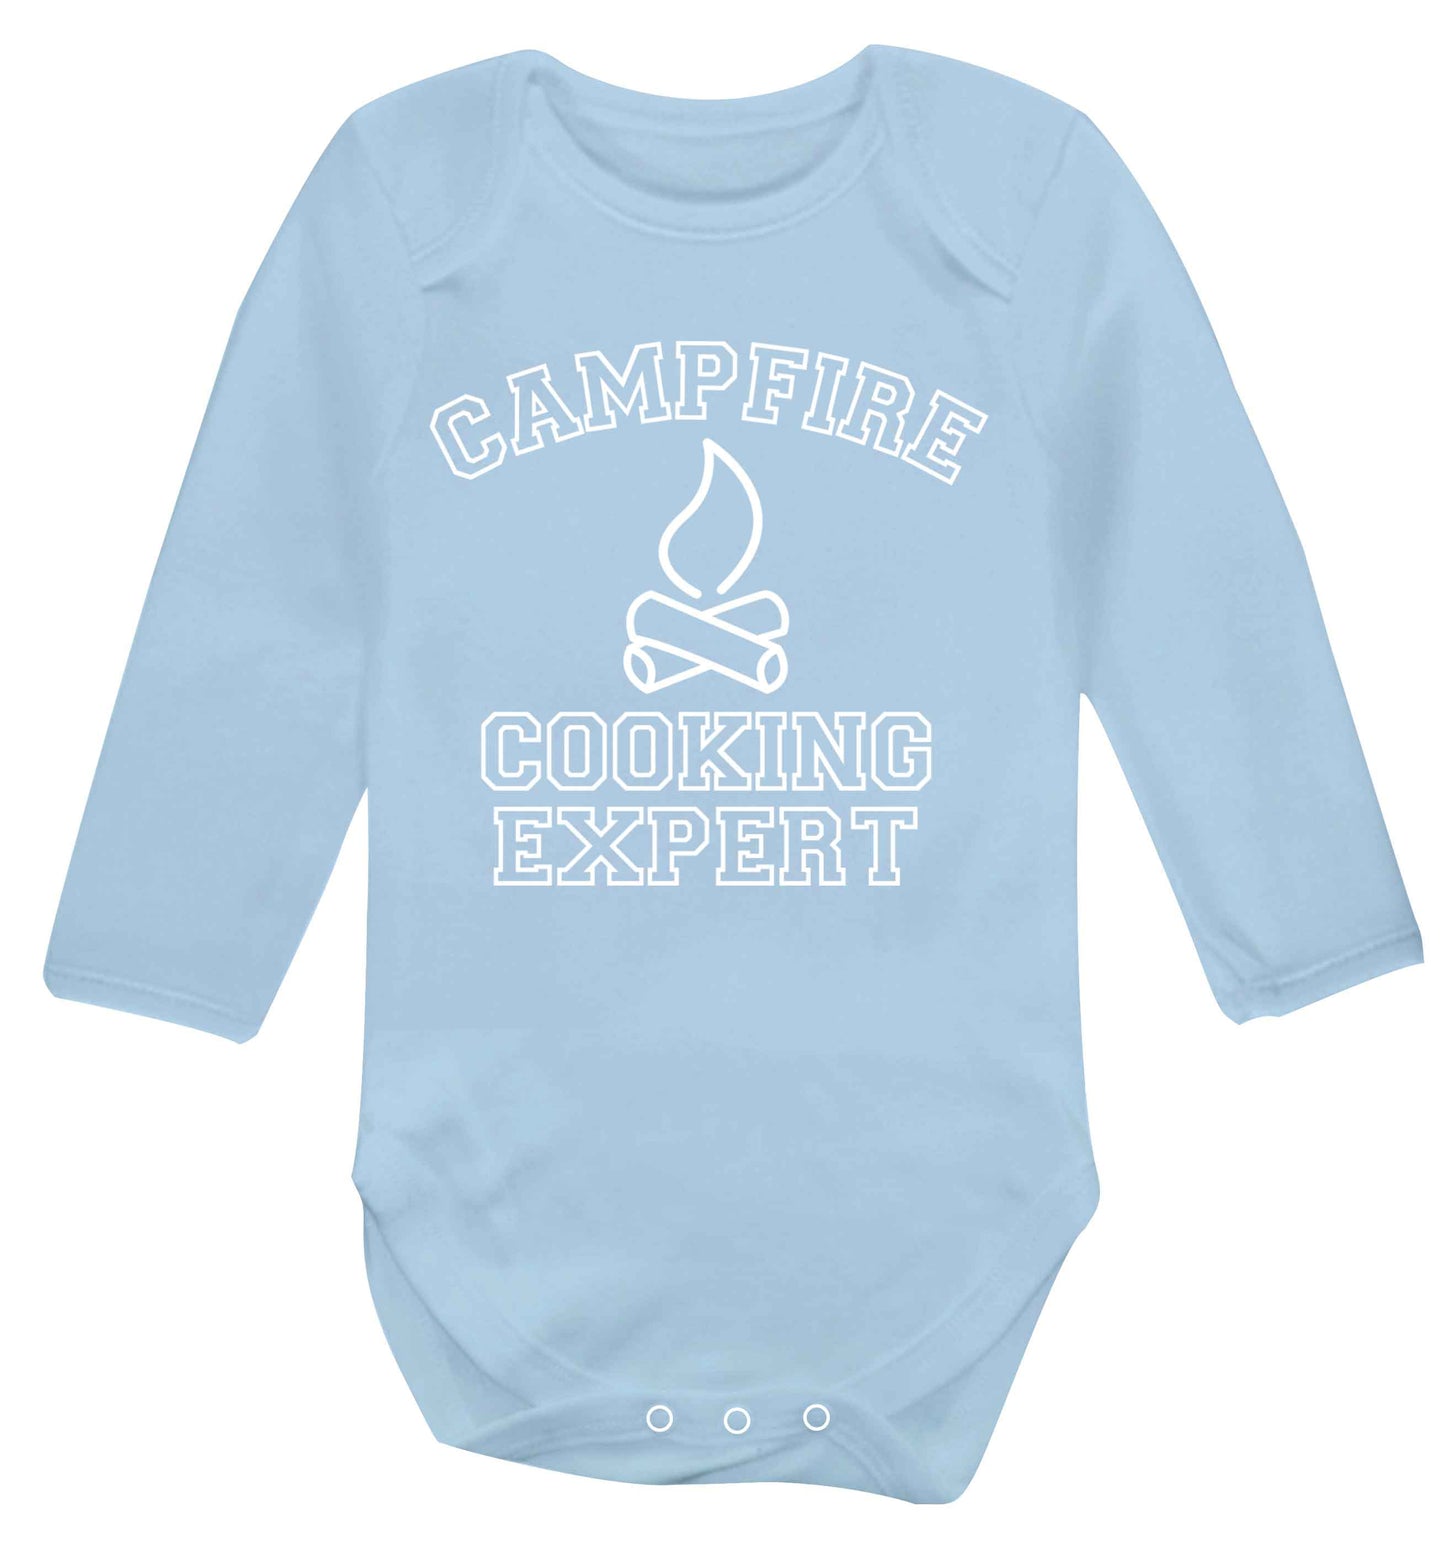 Campfire cooking expert Baby Vest long sleeved pale blue 6-12 months